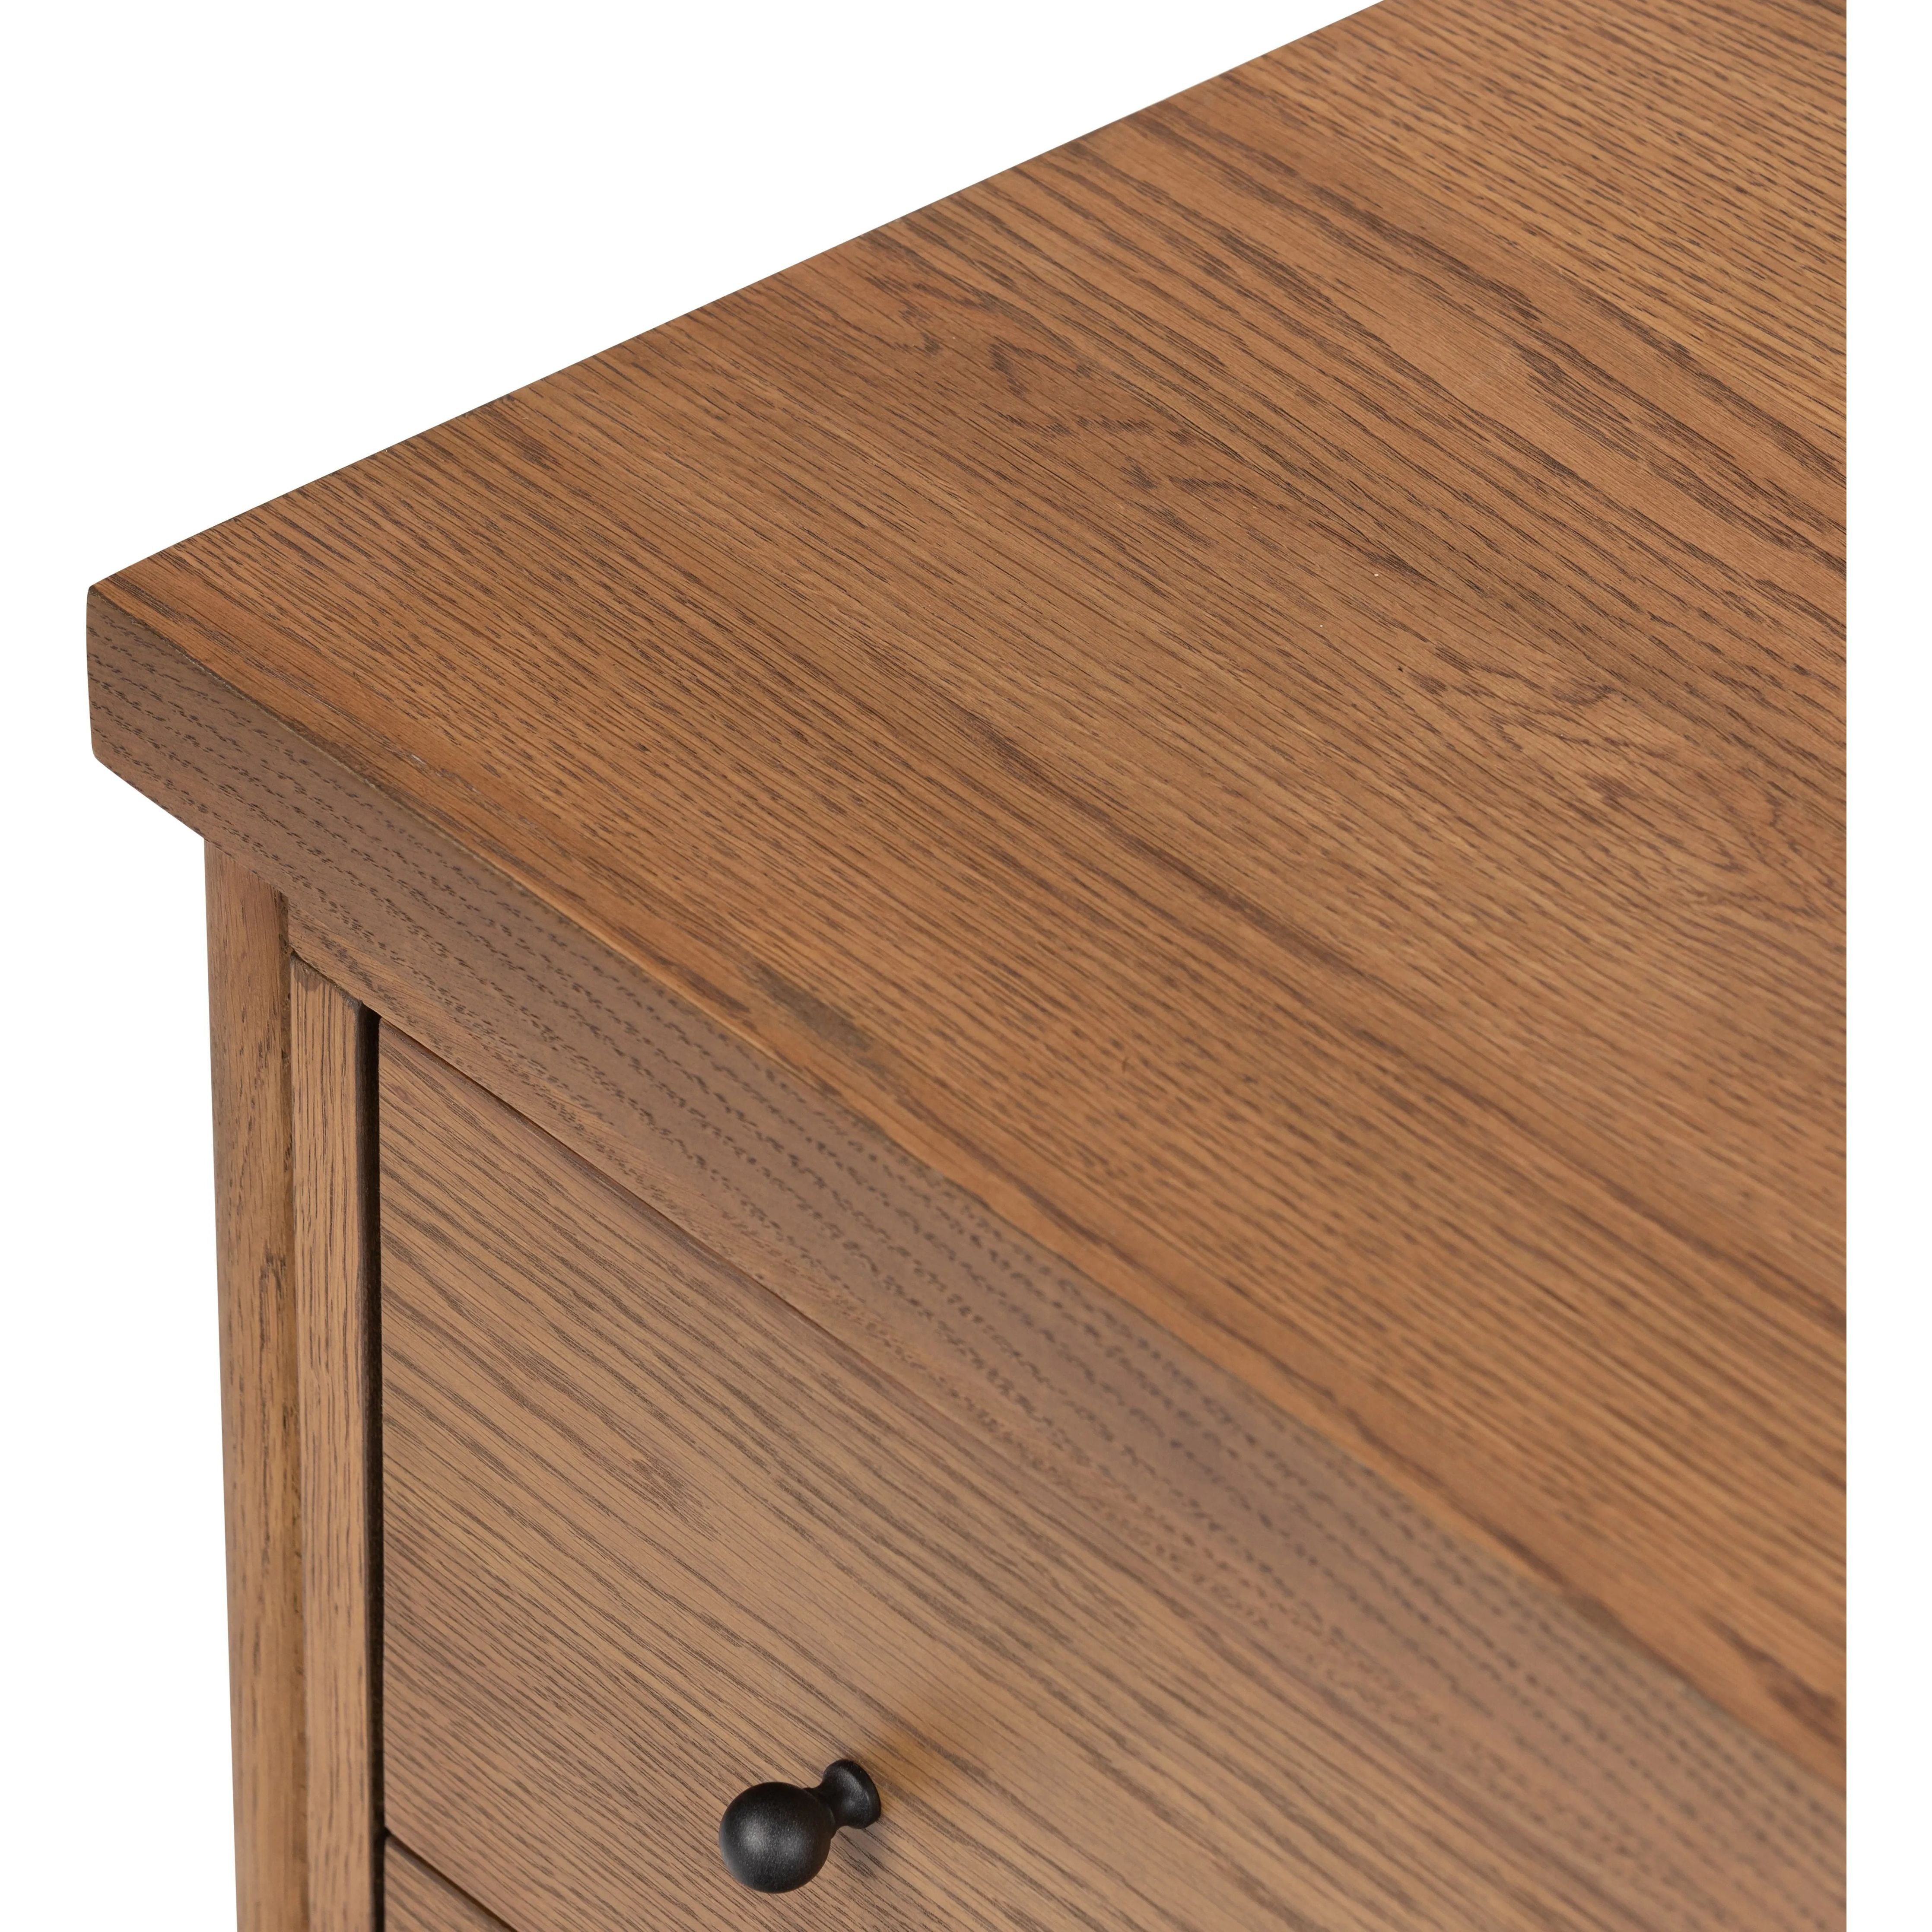 Rounded, chunky dowel legs in an amber oak finish support the overhang top of of this nightstand. Two drawers provide ample storage, finished with simple gunmetal hardware Amethyst Home provides interior design, new home construction design consulting, vintage area rugs, and lighting in the Kansas City metro area.